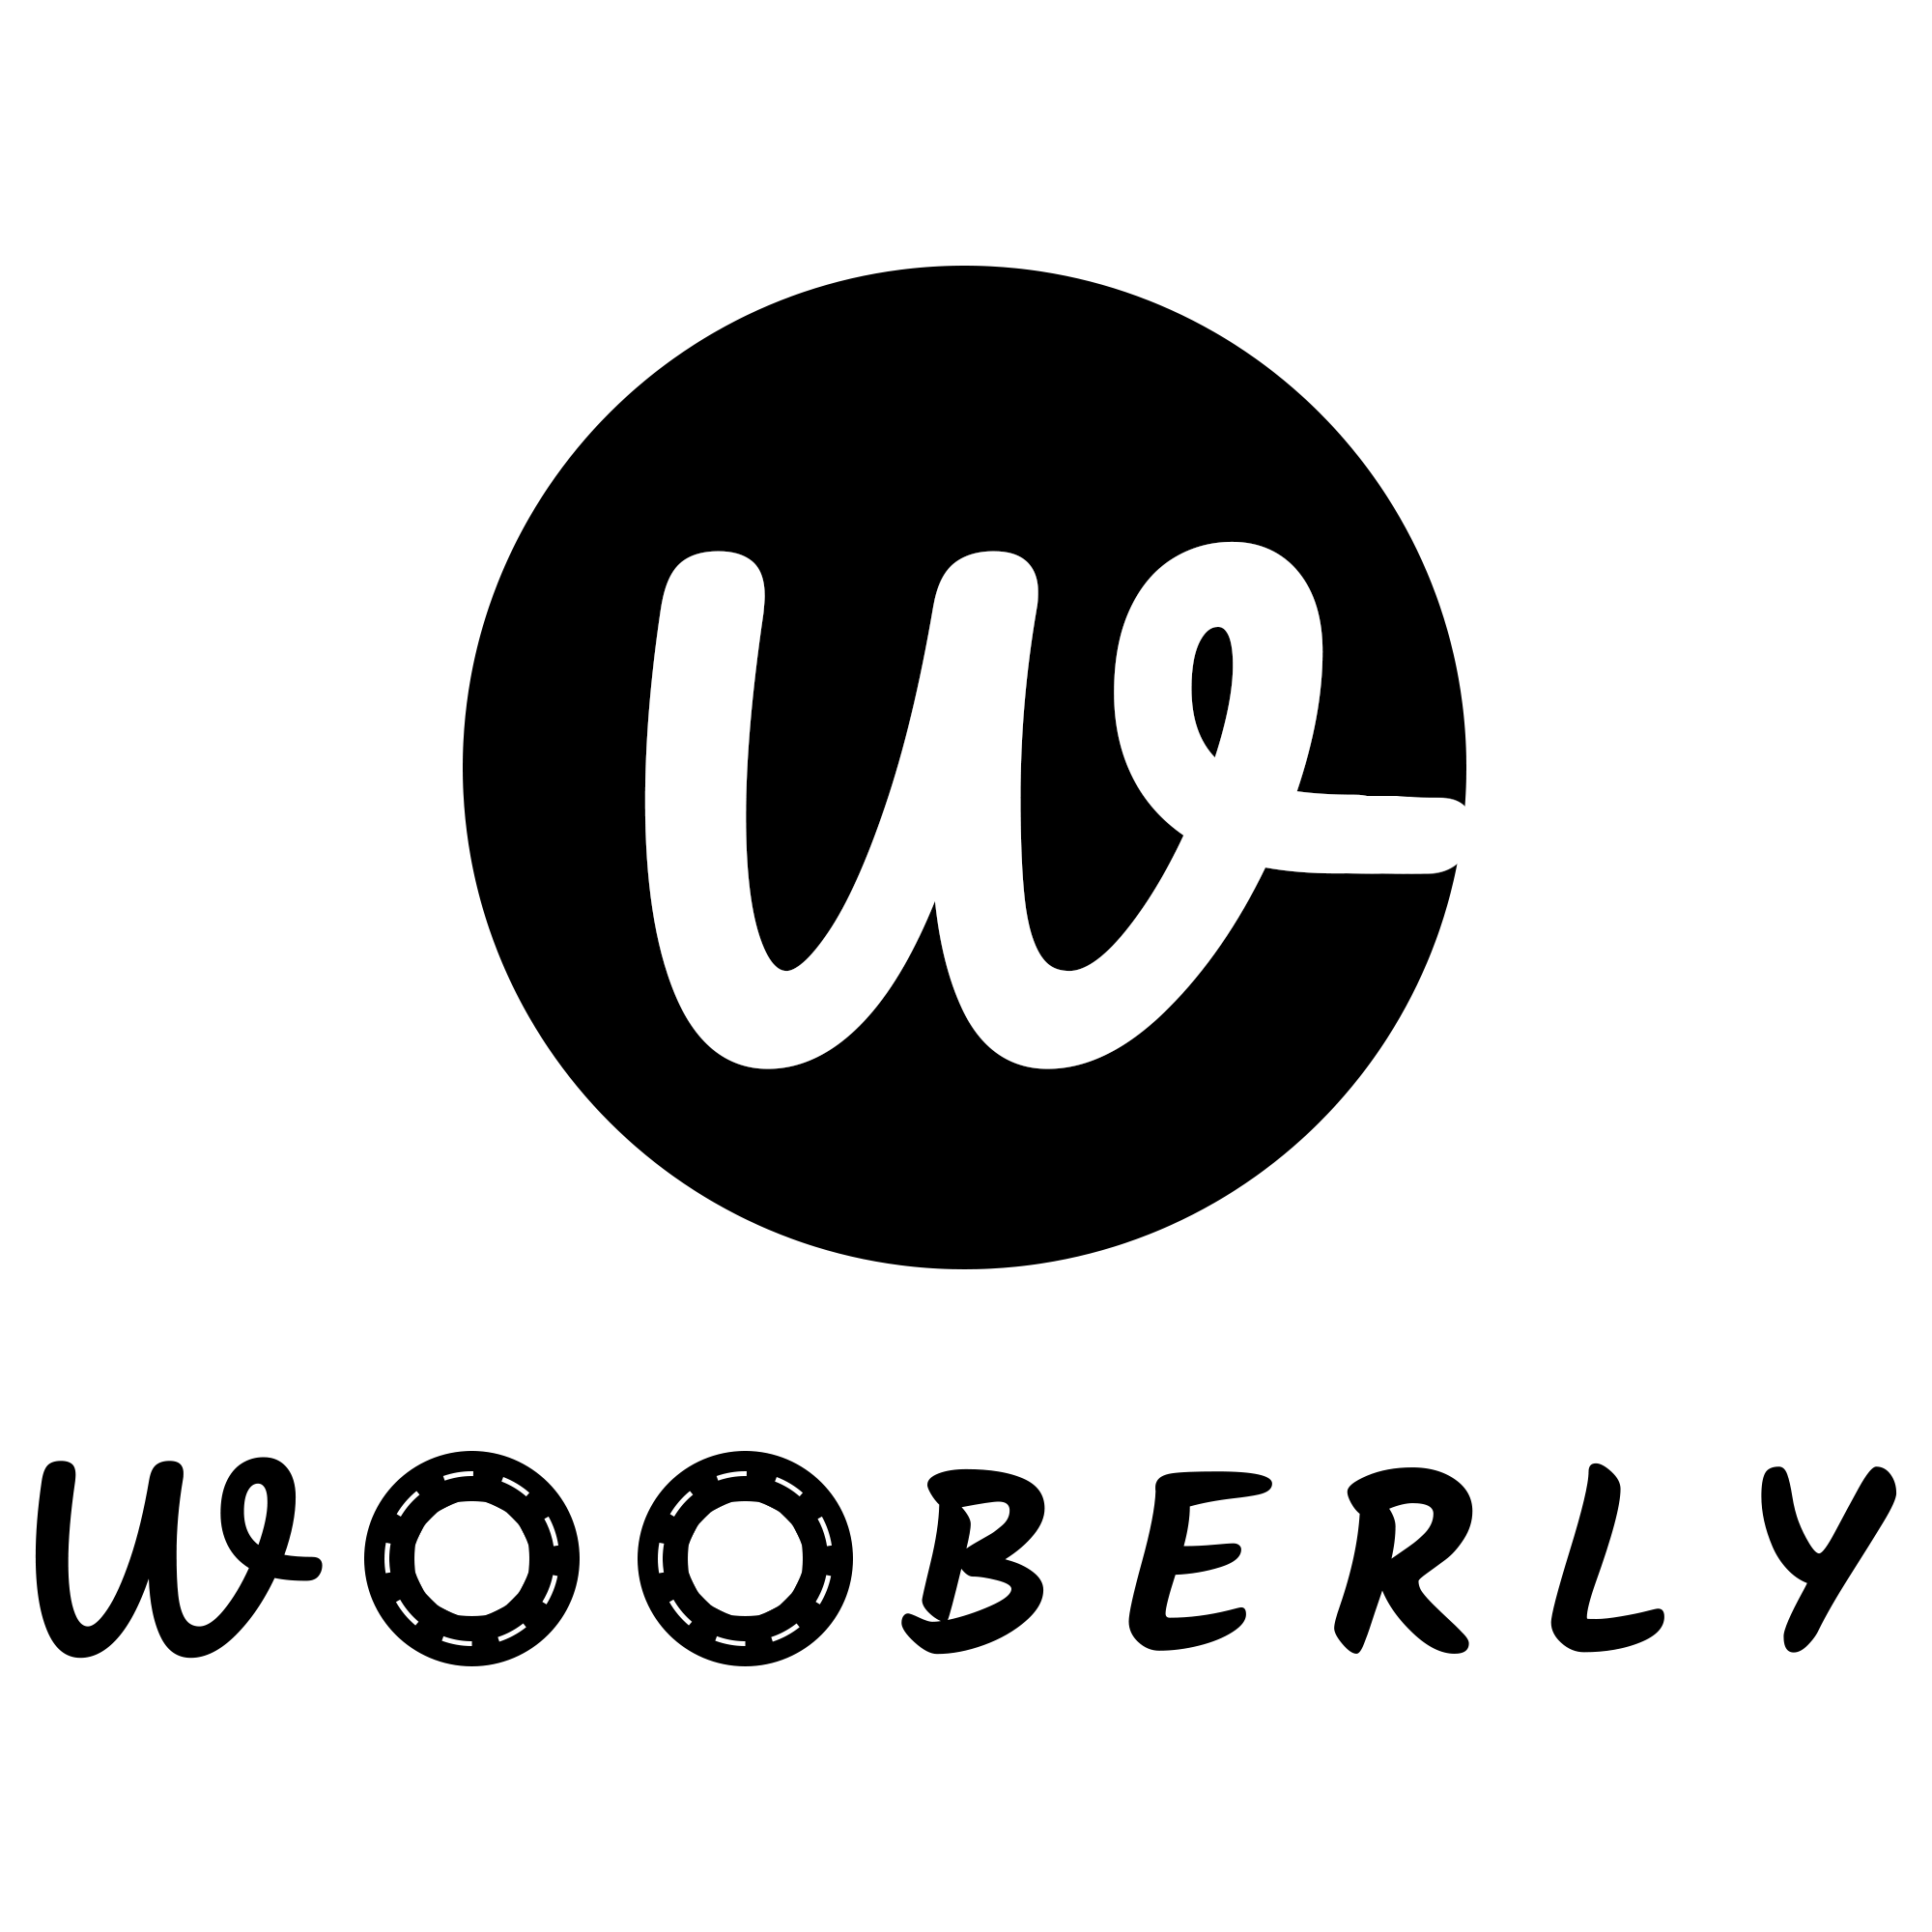 Wooberly - Uber clone app|Legal Services|Professional Services